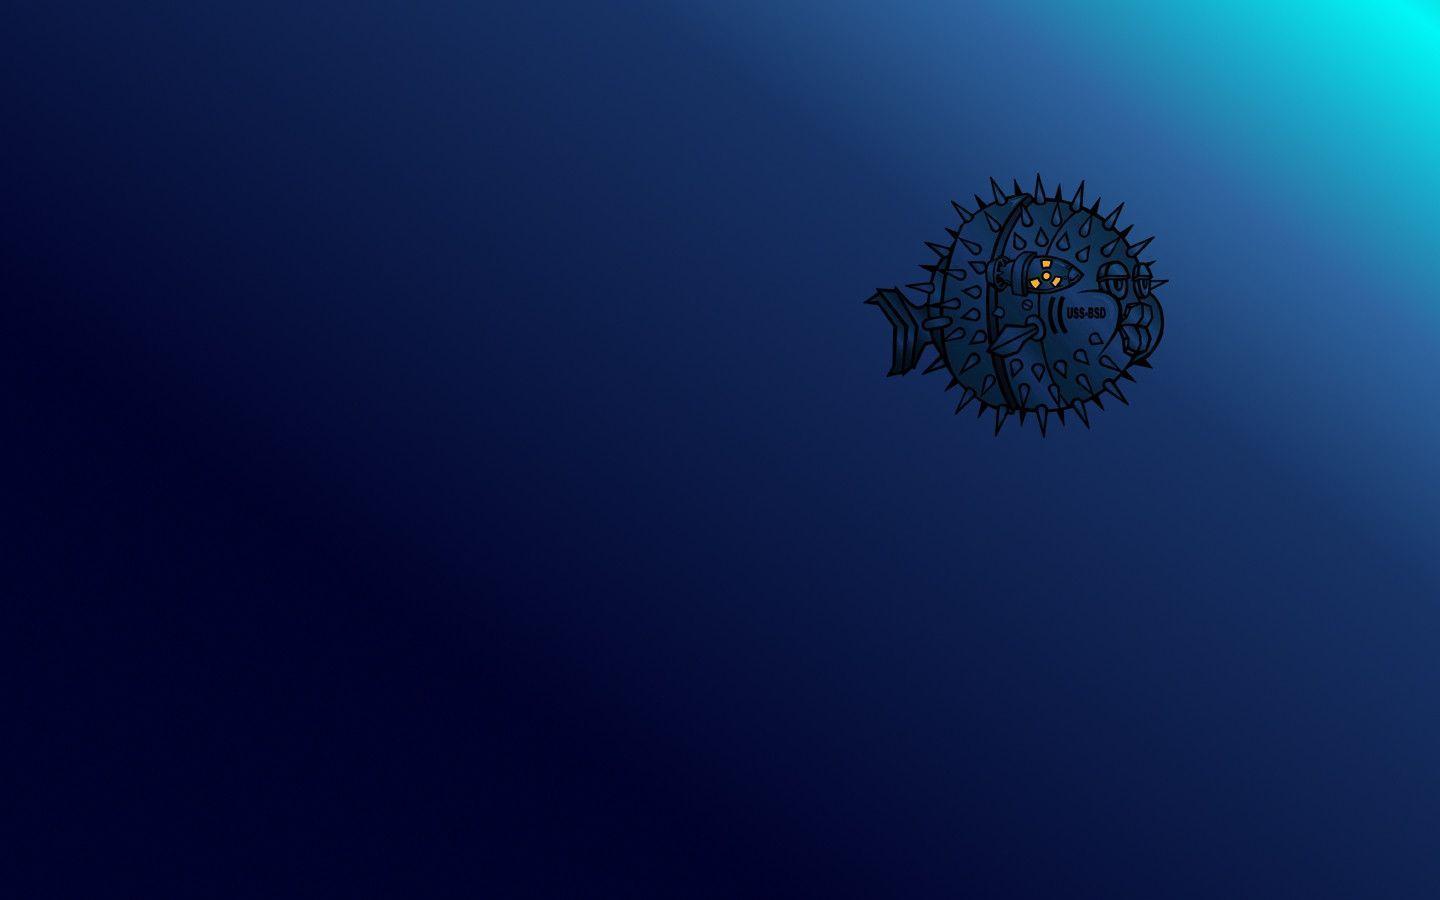 The Image of Blue Openbsd Wallpaper Fresh HD Wallpaper